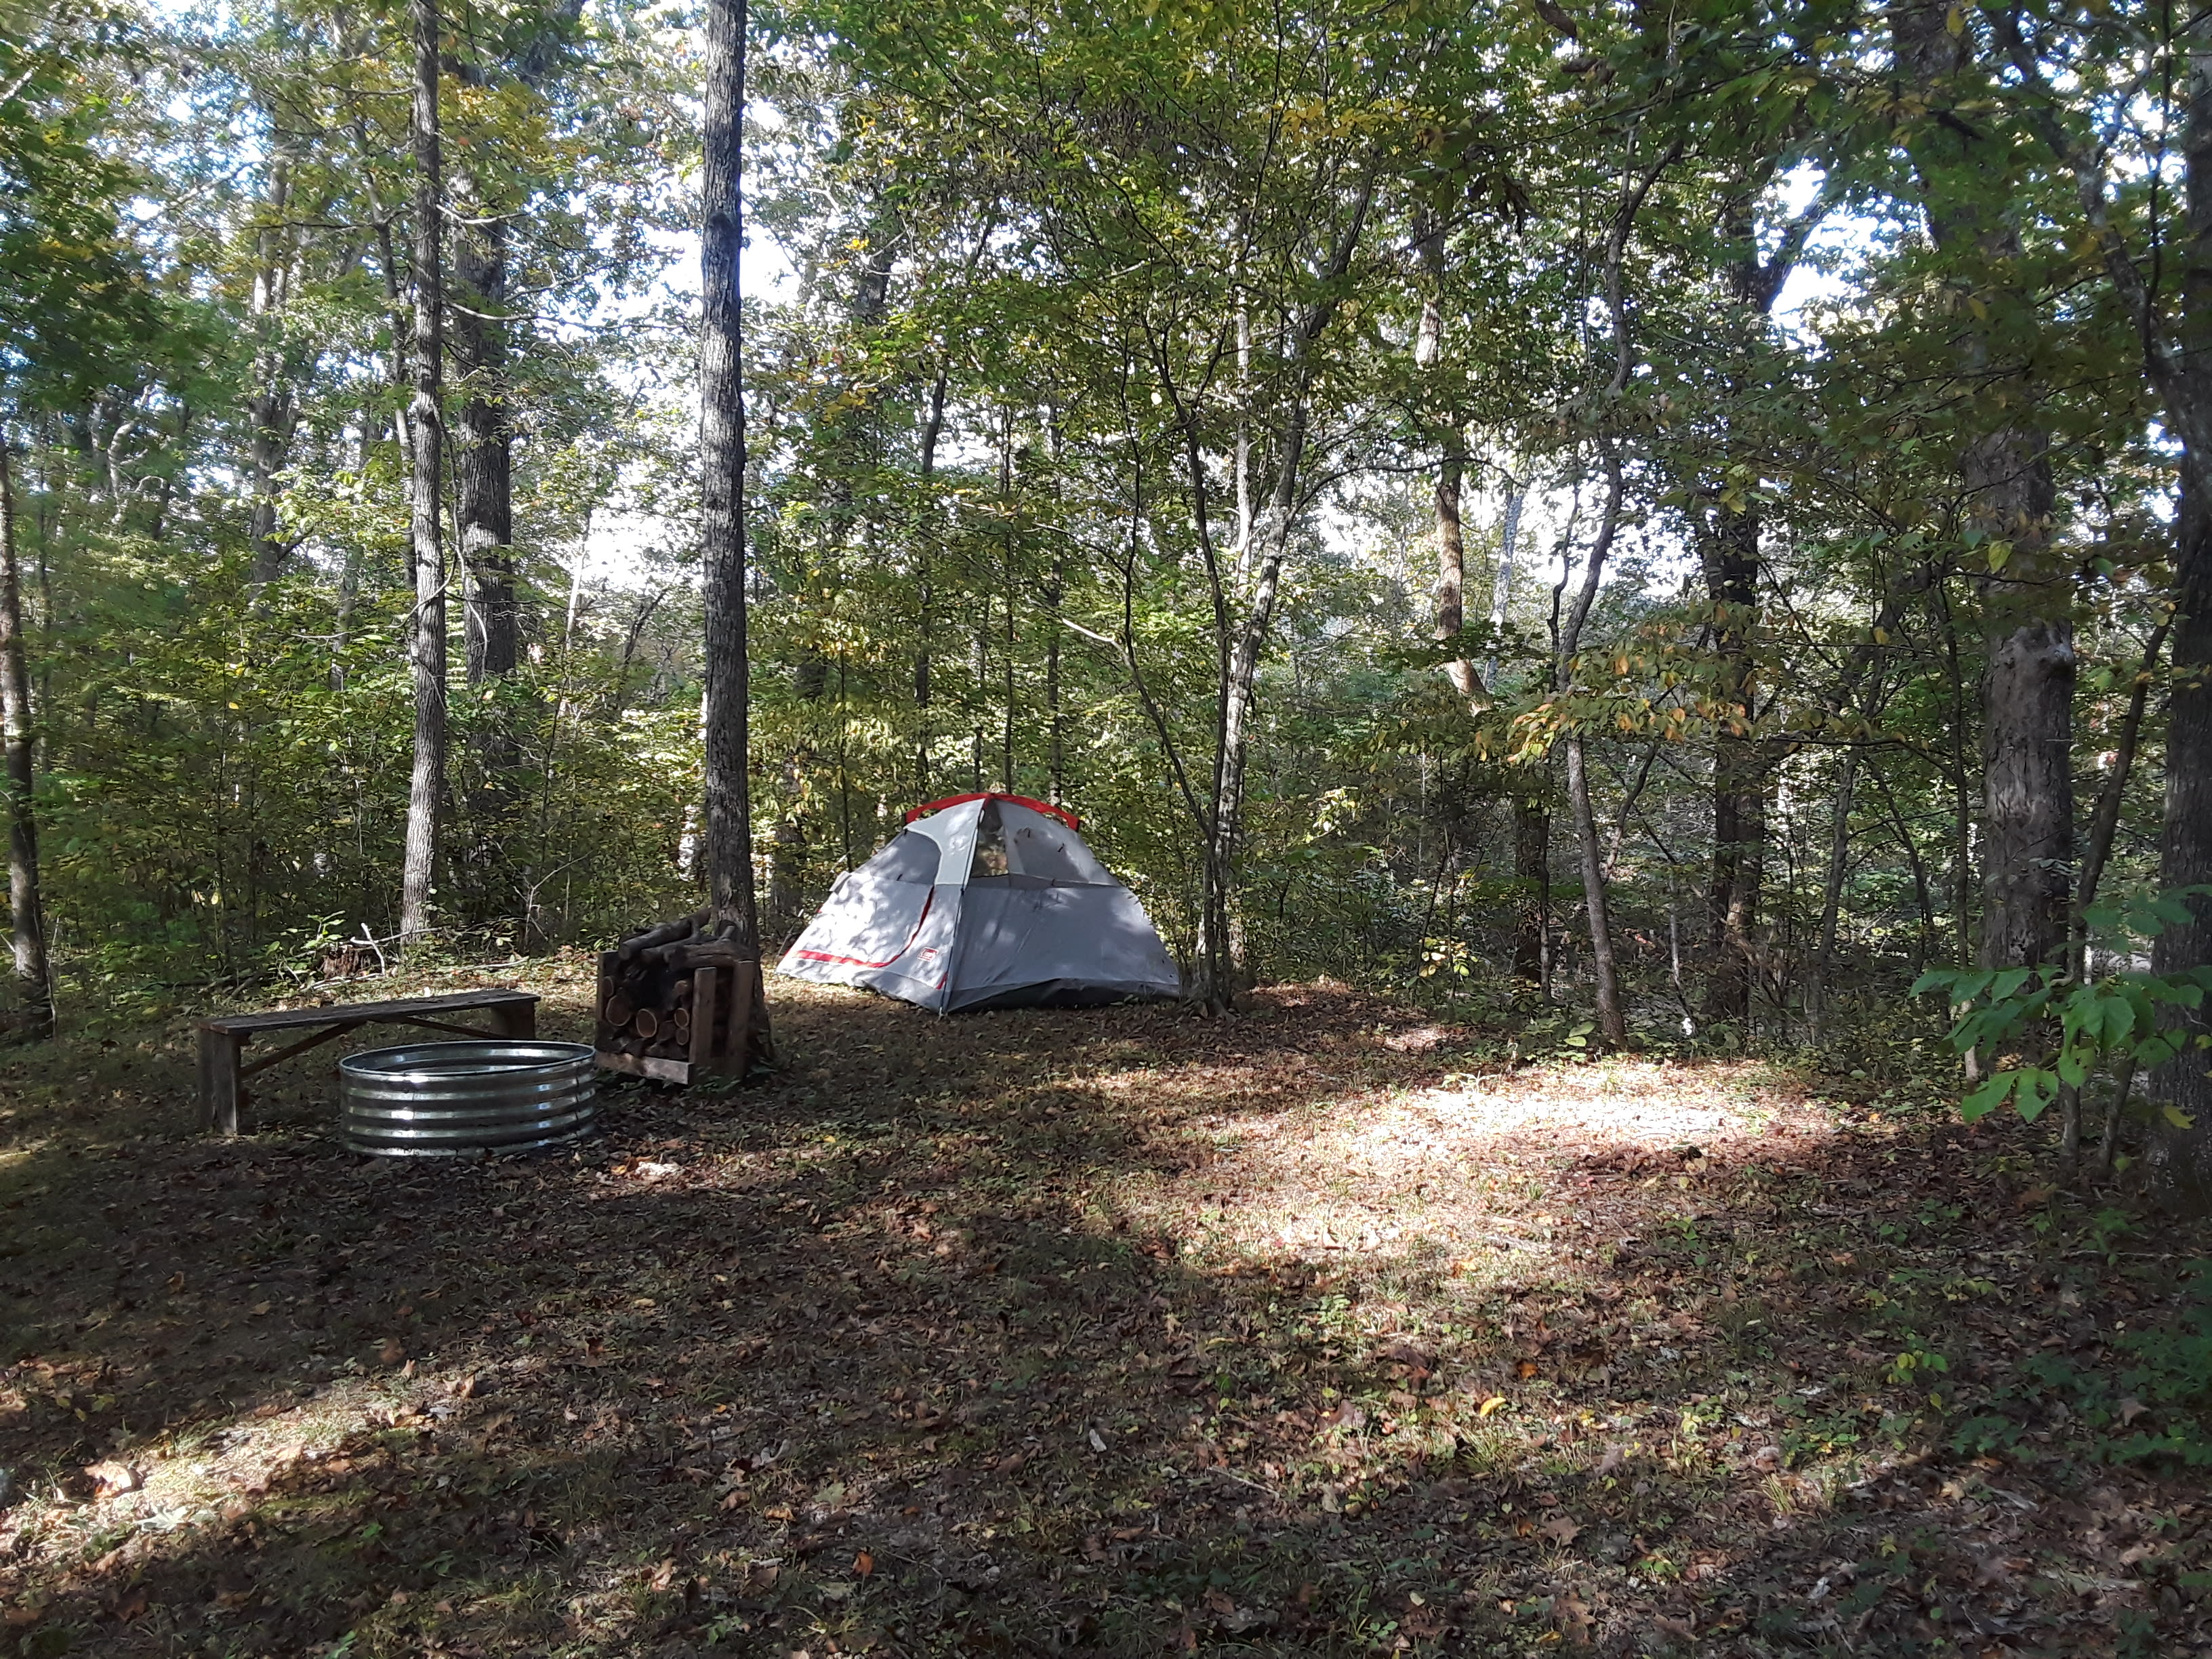 This is campsite 2 located near the creek not on it like 1 is. It’s the smallest of them all but surrounded by woods an closest  to the outhouse.  It can hold 2 maybe 3 small size tents.